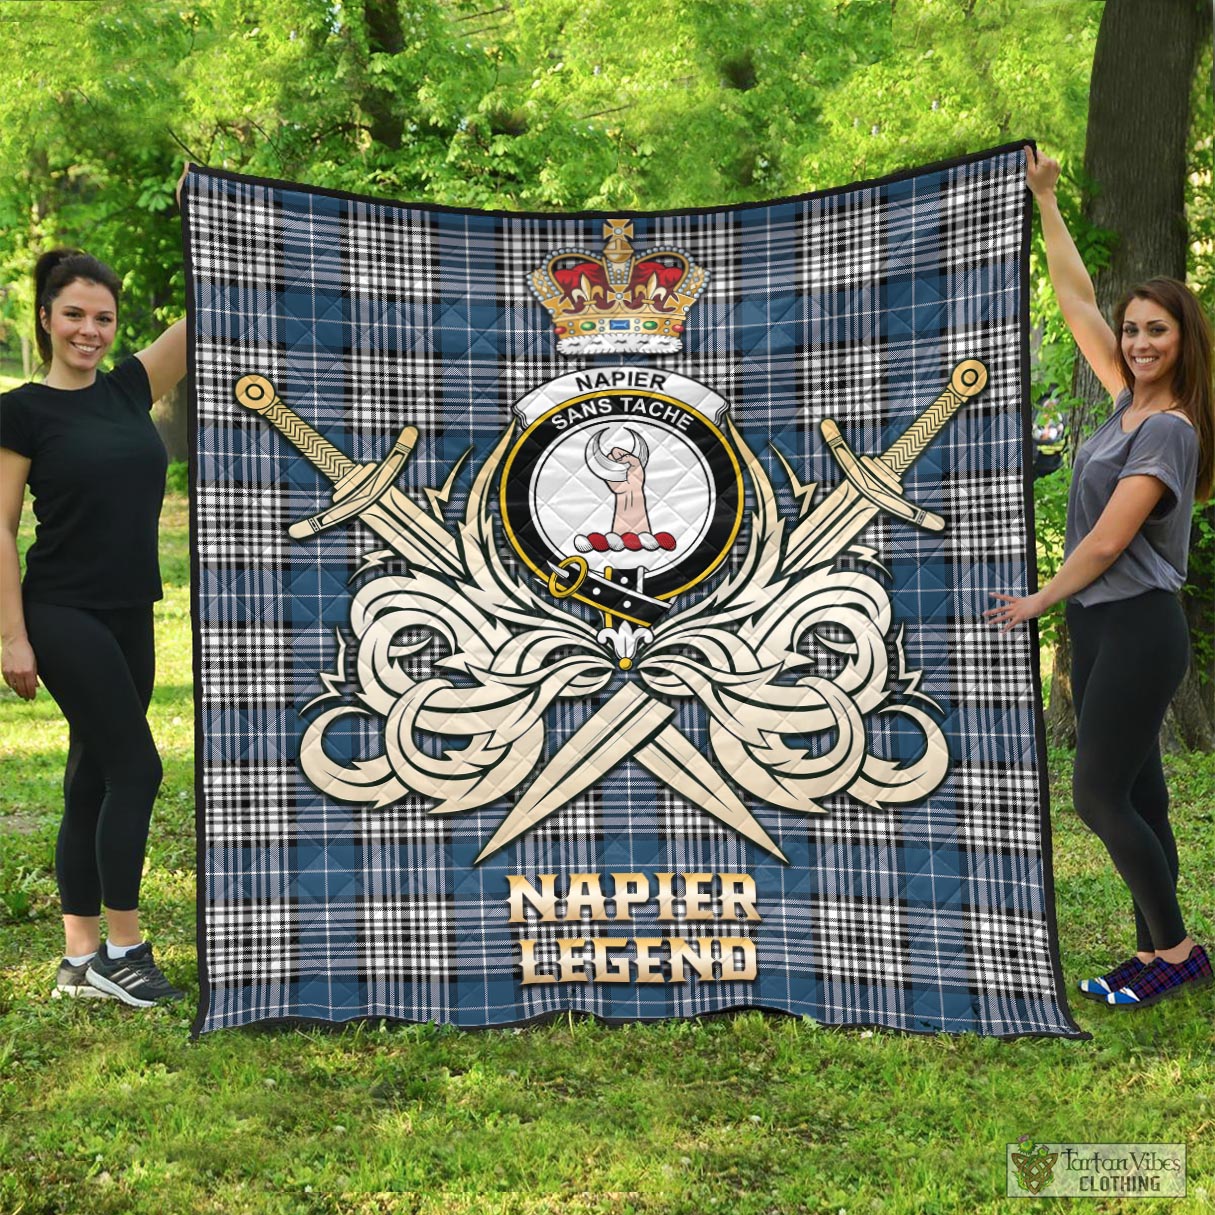 Tartan Vibes Clothing Napier Modern Tartan Quilt with Clan Crest and the Golden Sword of Courageous Legacy